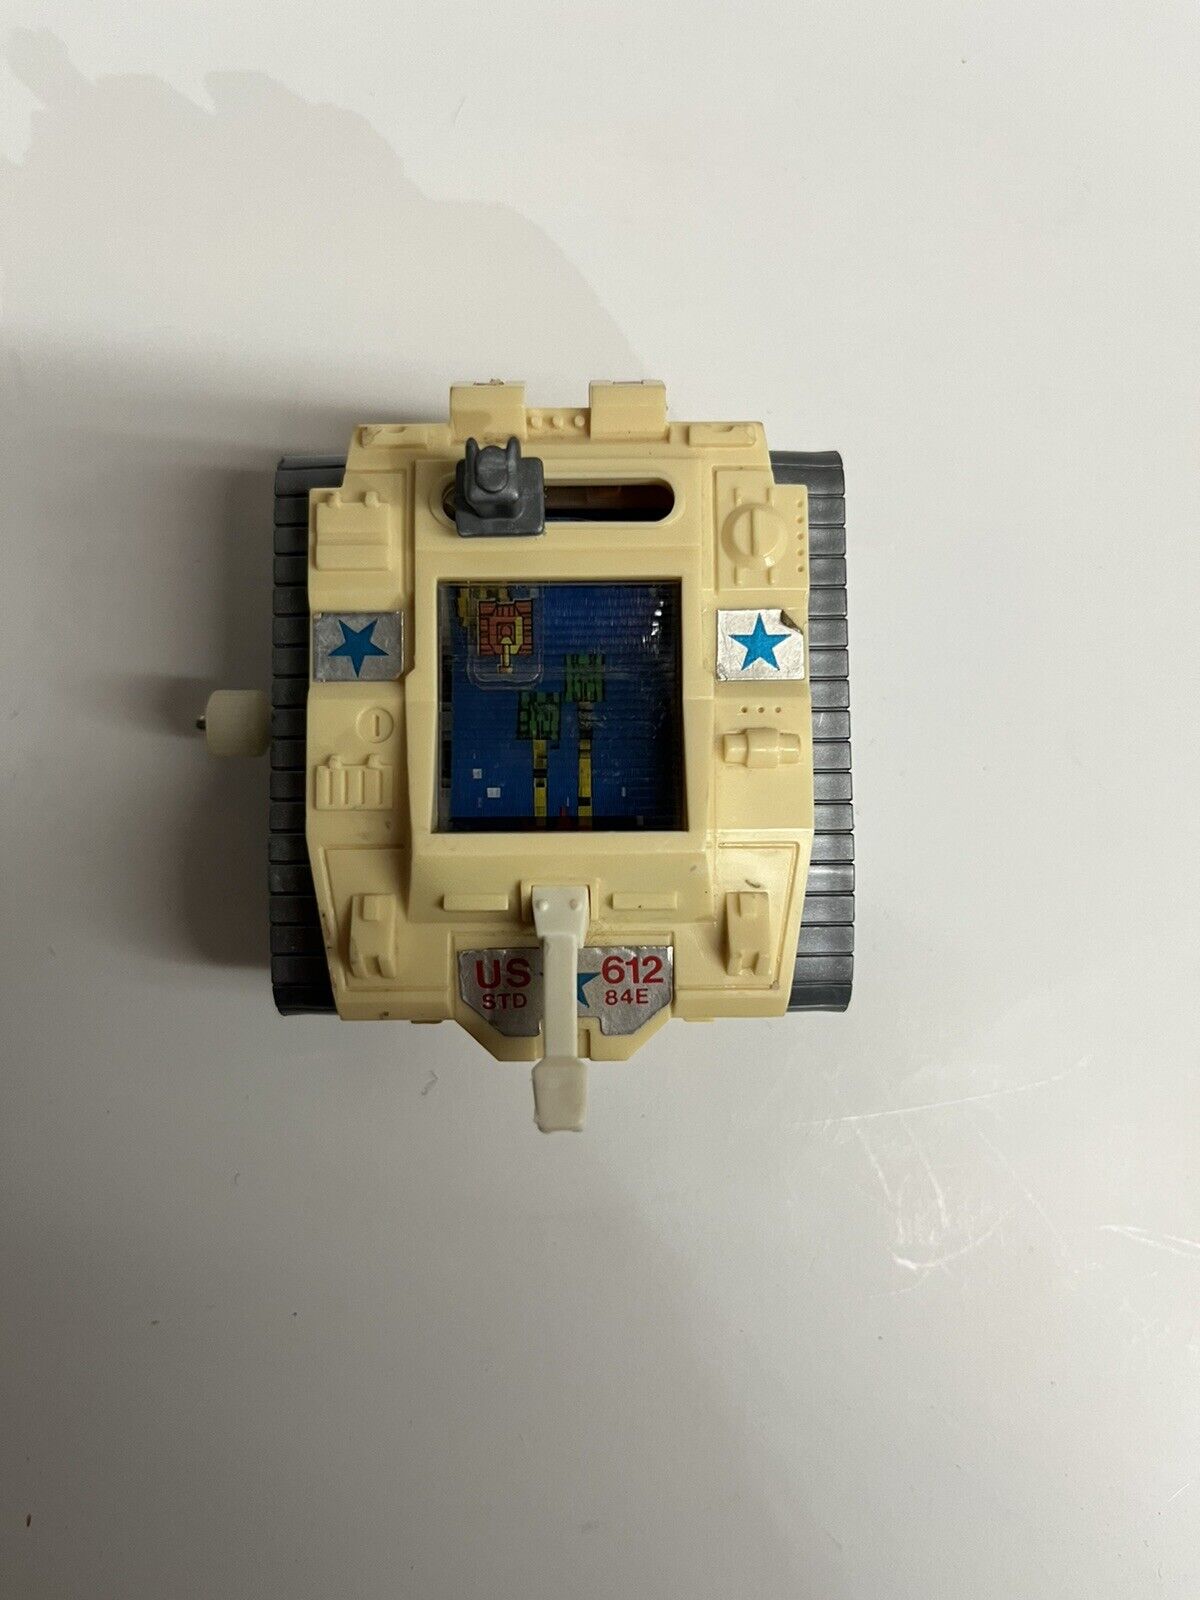 *vtg Tomy Toys Wind Up Tank Watch Video Game Toy Military Space Works No Strap